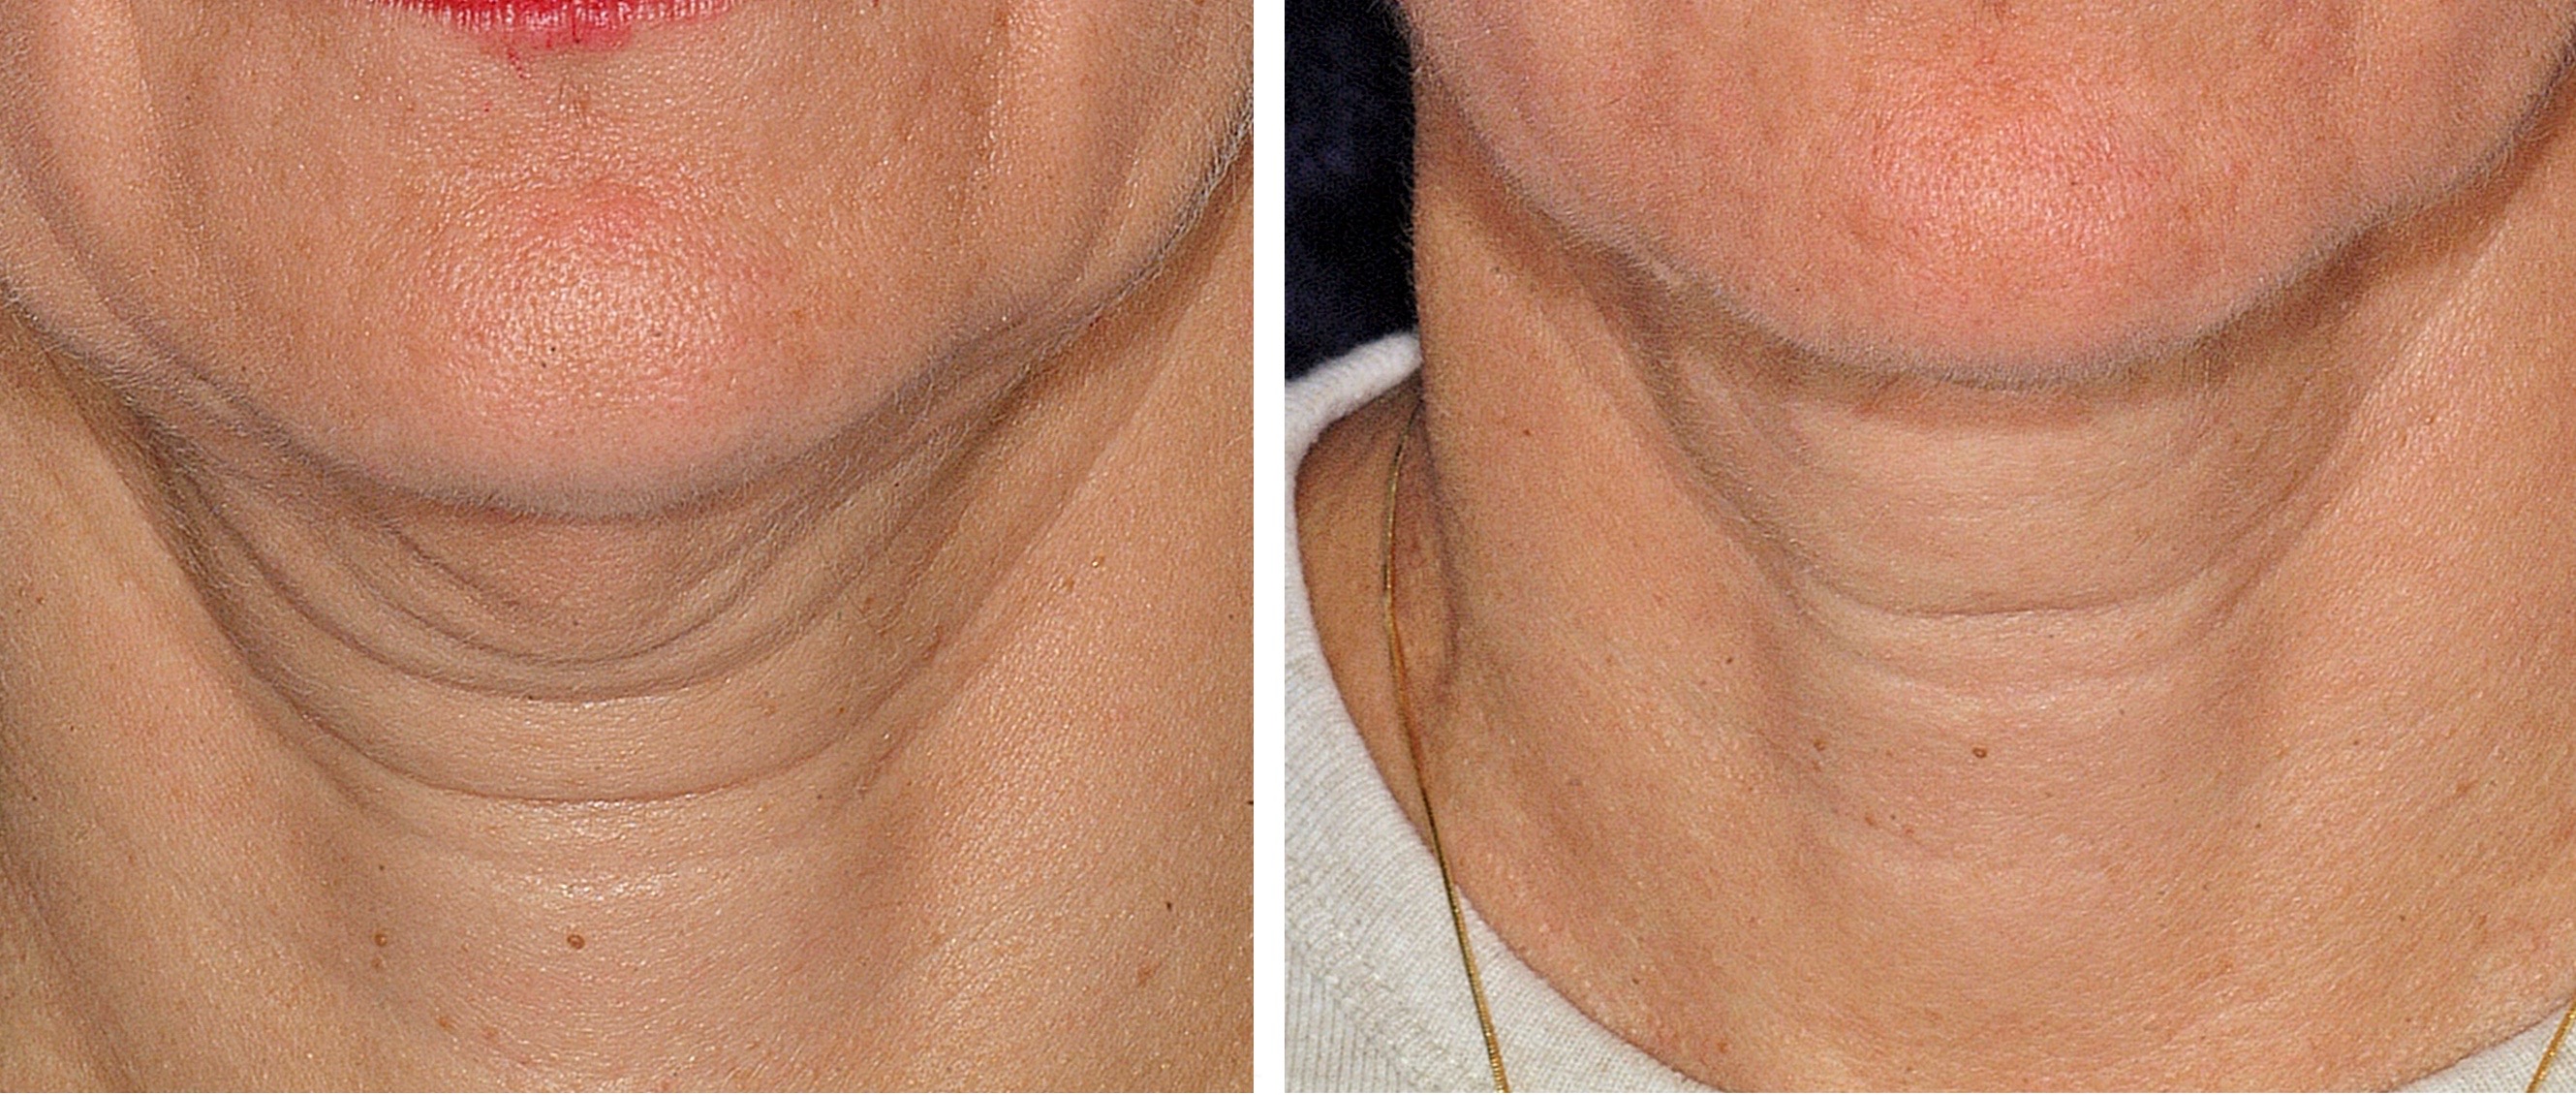 Thermage for non-surgical face lifts and to tighten loose skin was the